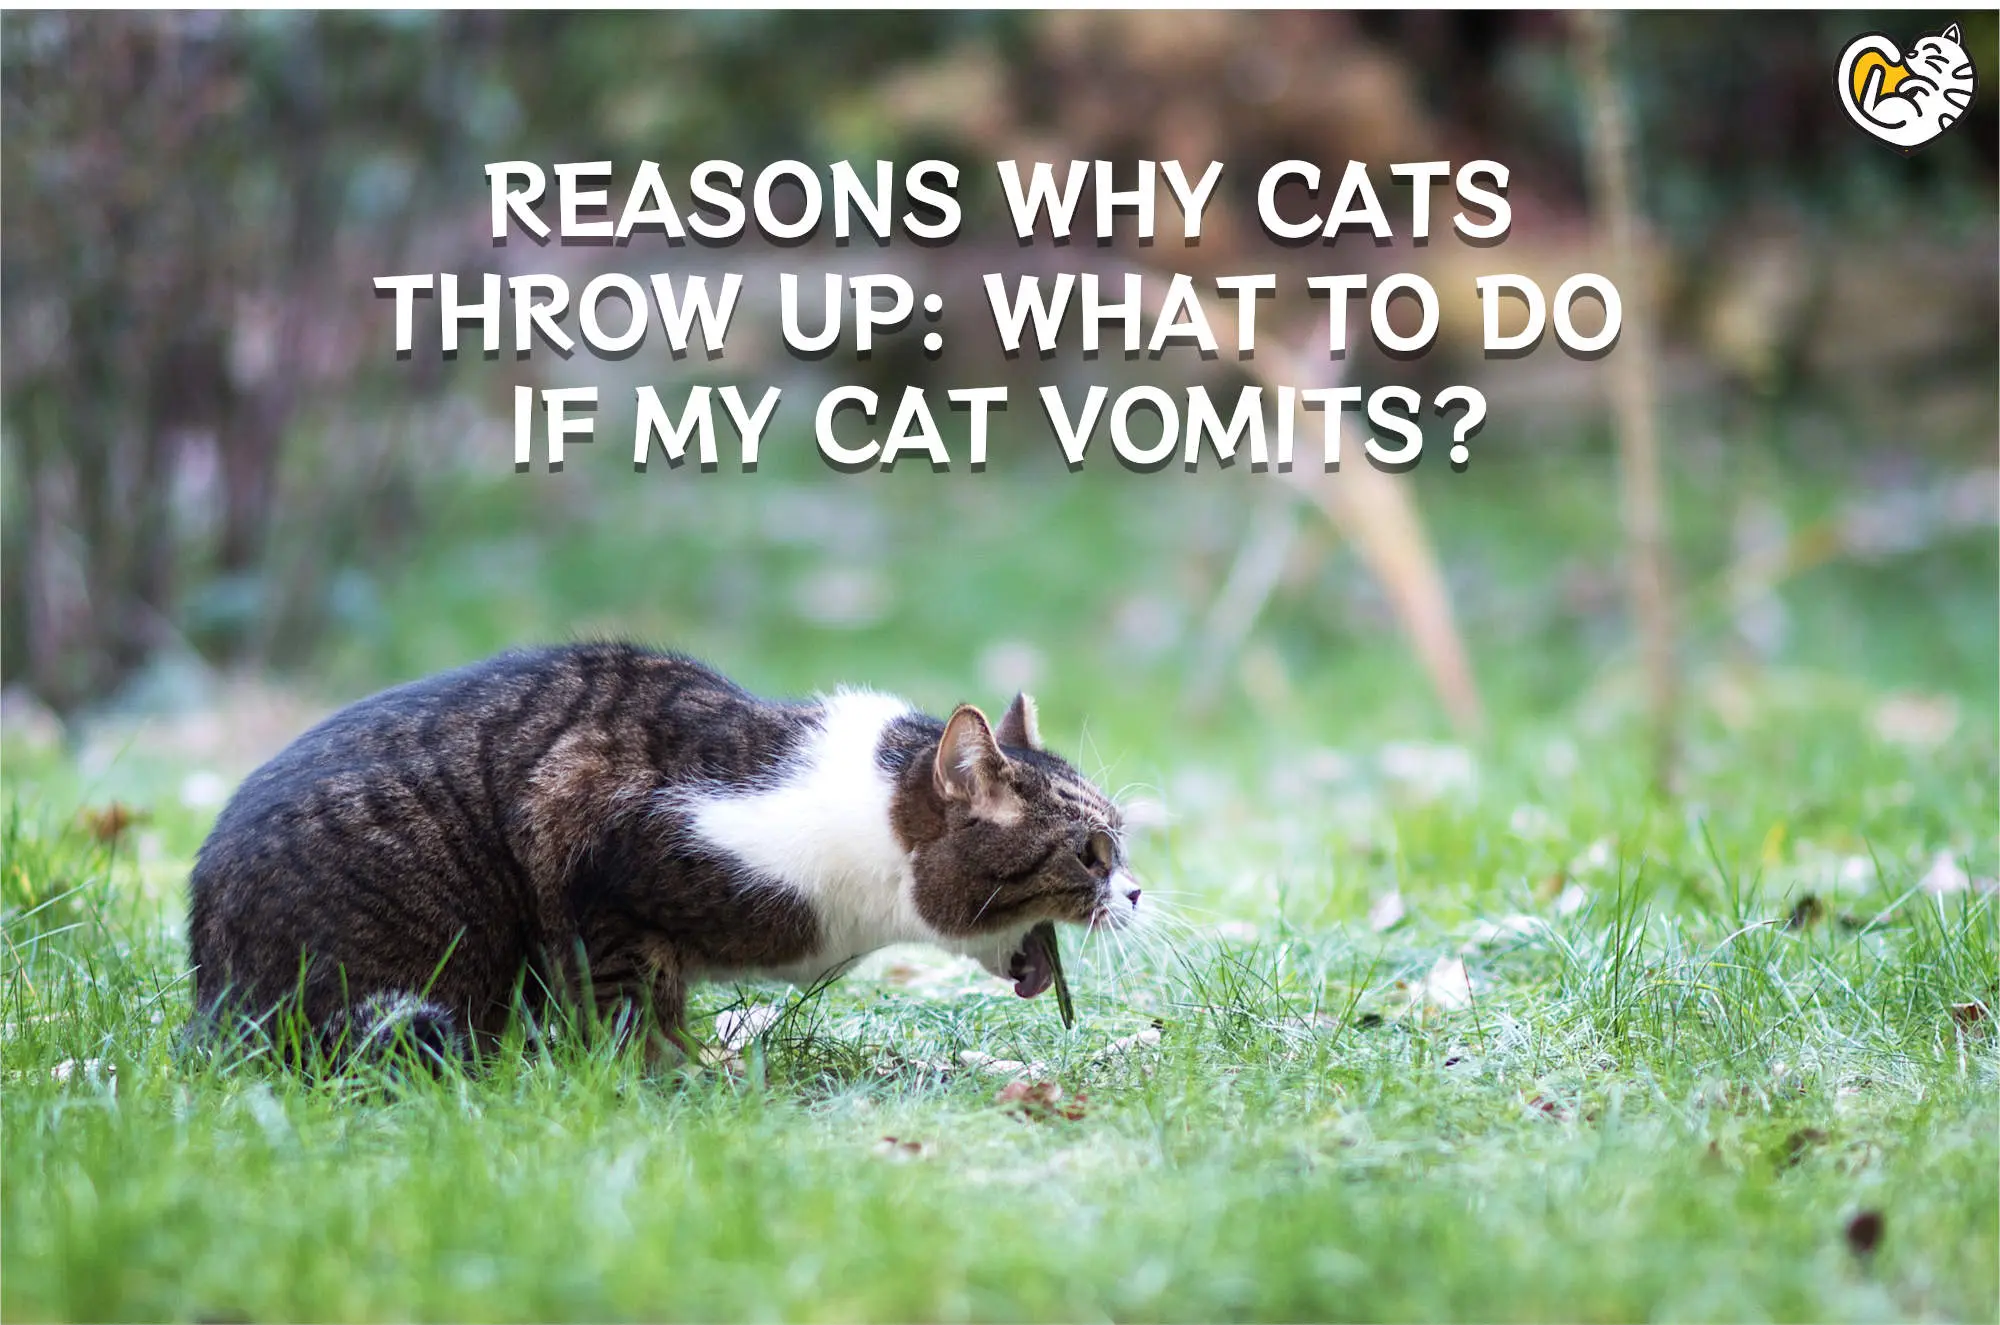 Reasons Why Cats Throw Up: What to Do if My Cat Vomits?